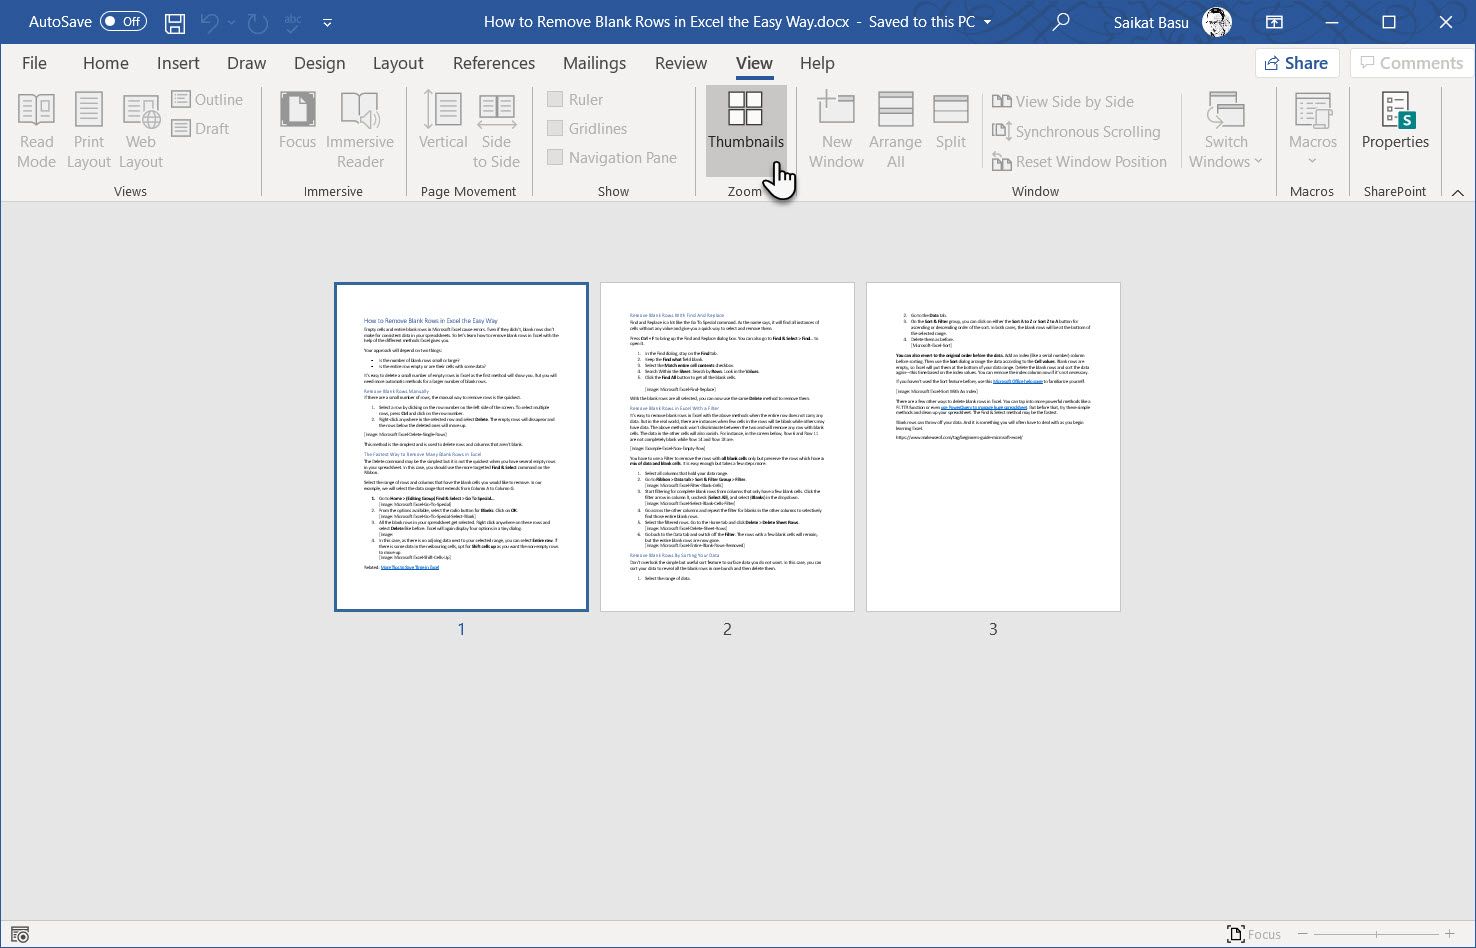 Microsoft Word Thumbnails in the Side to Side View